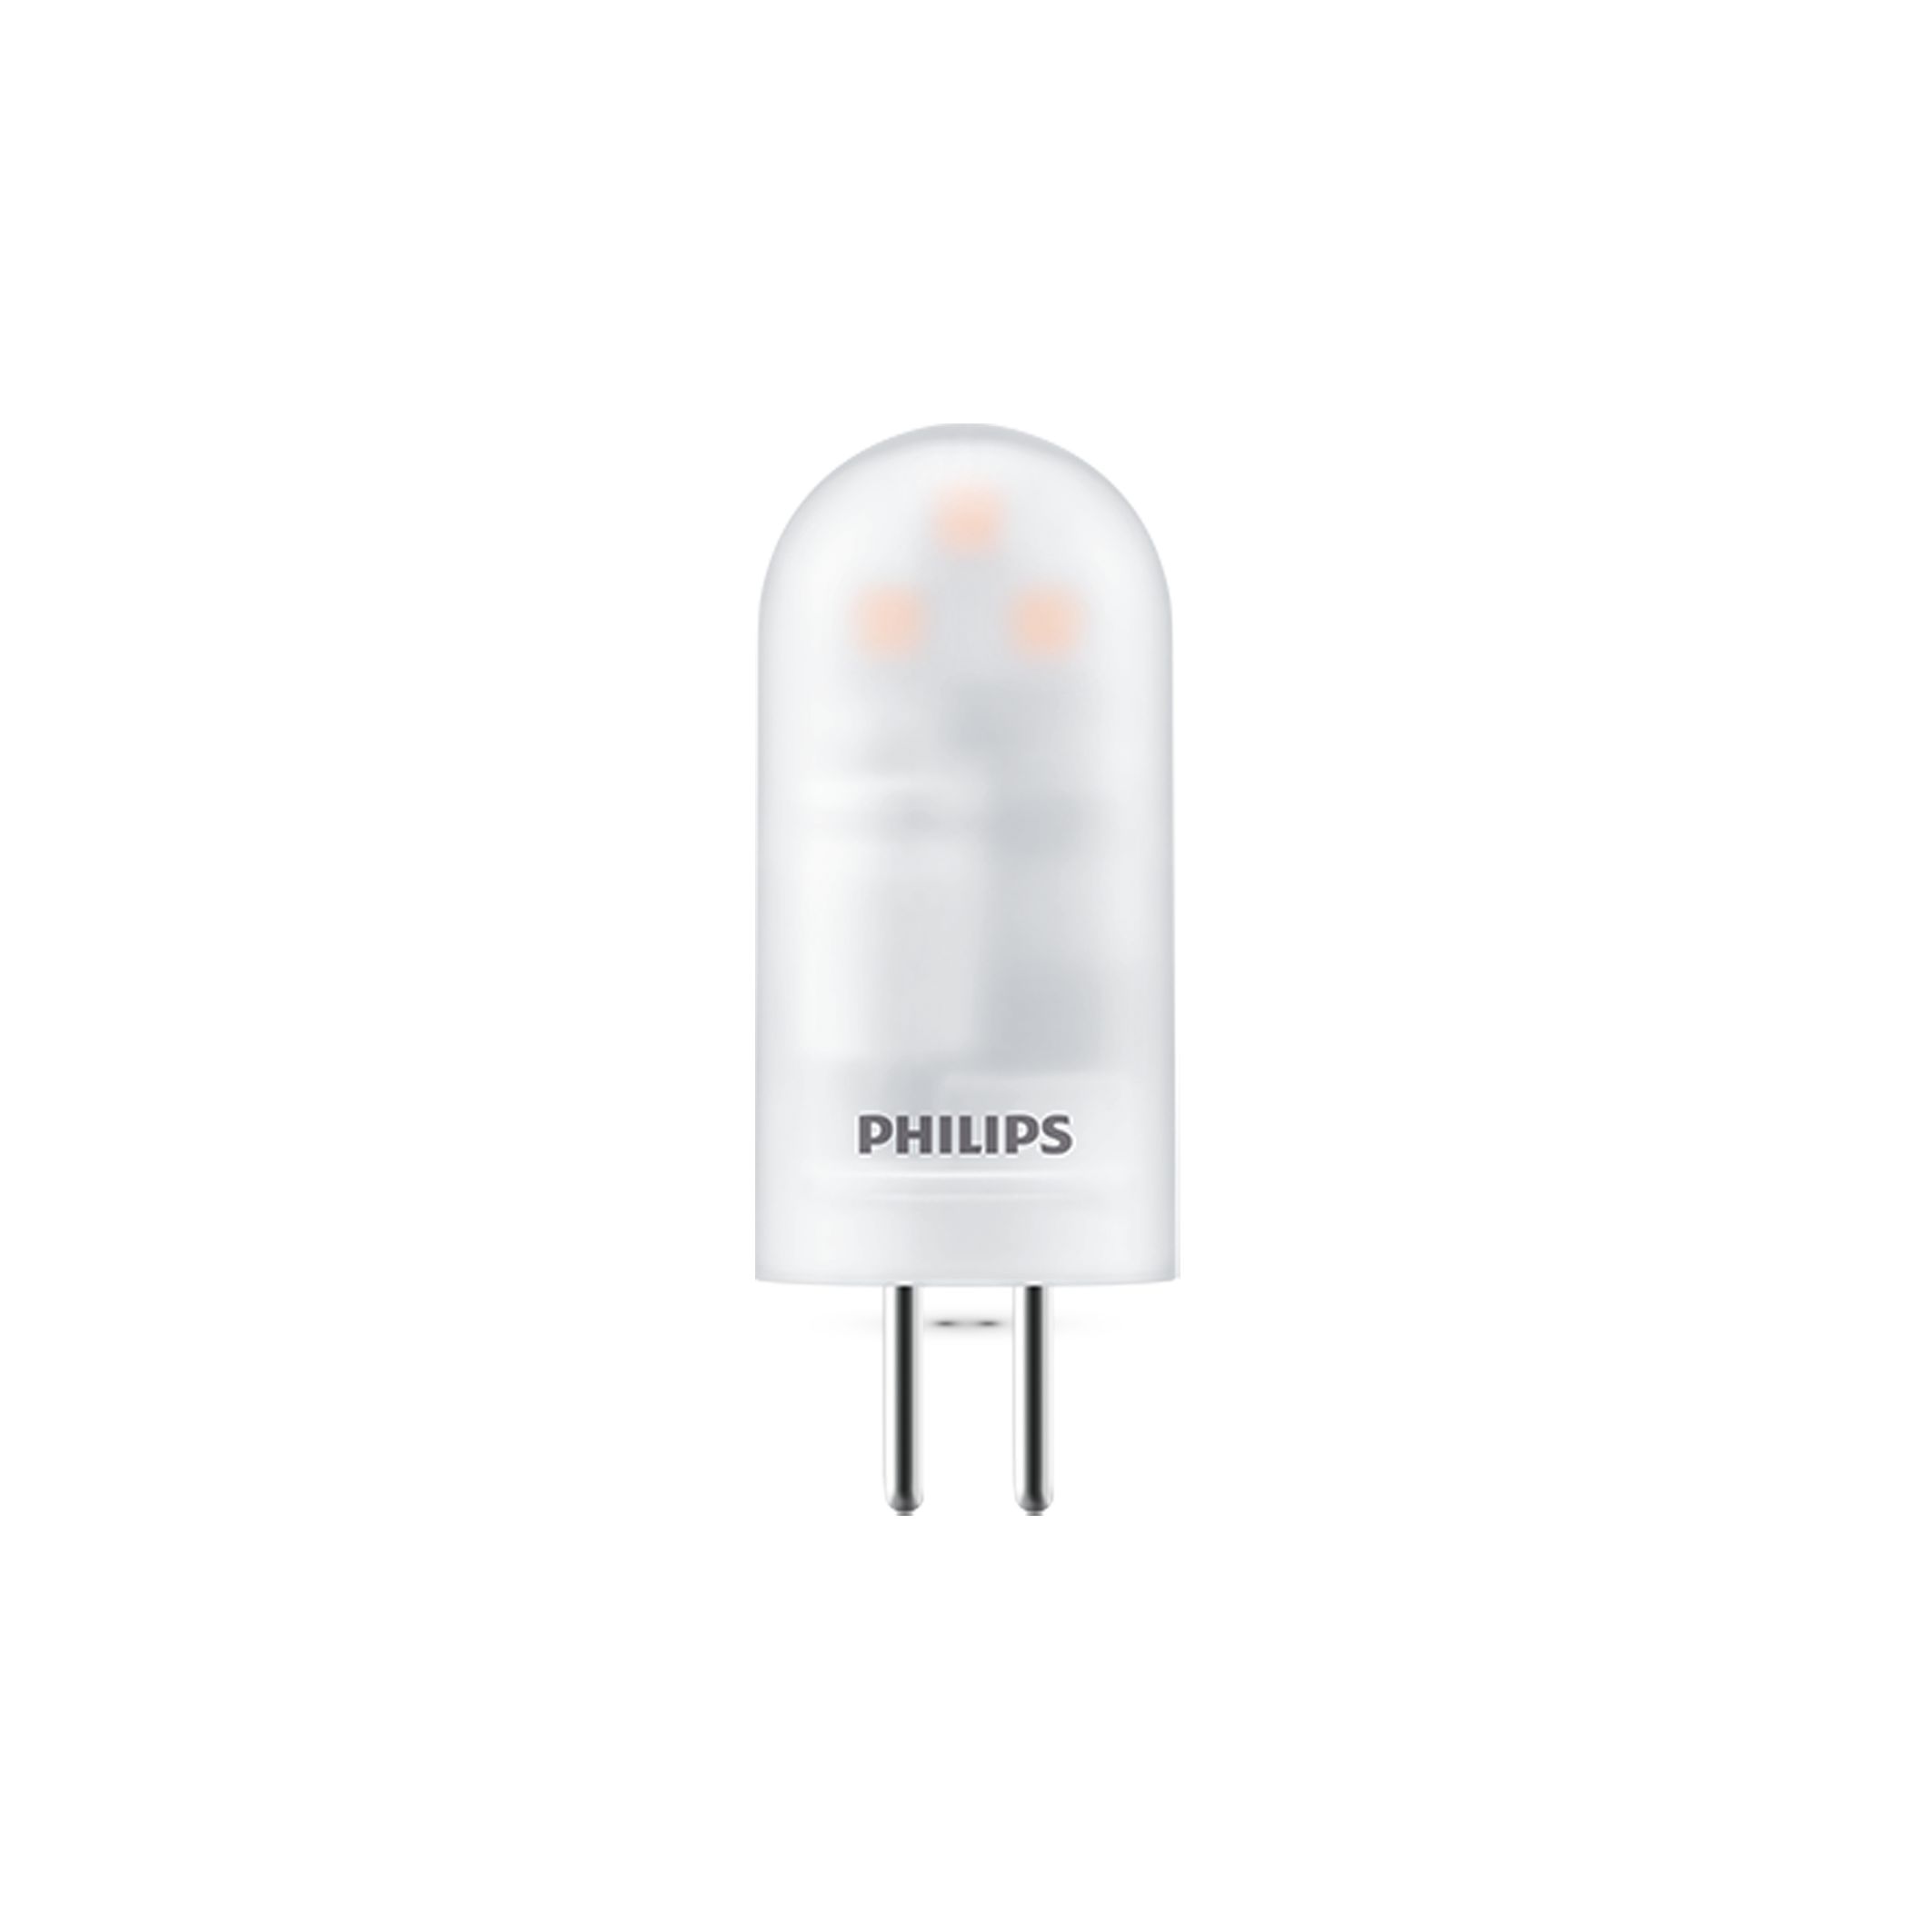 Stramme Halloween niveau LED Specialty Lamps | 7404042 | Philips lighting